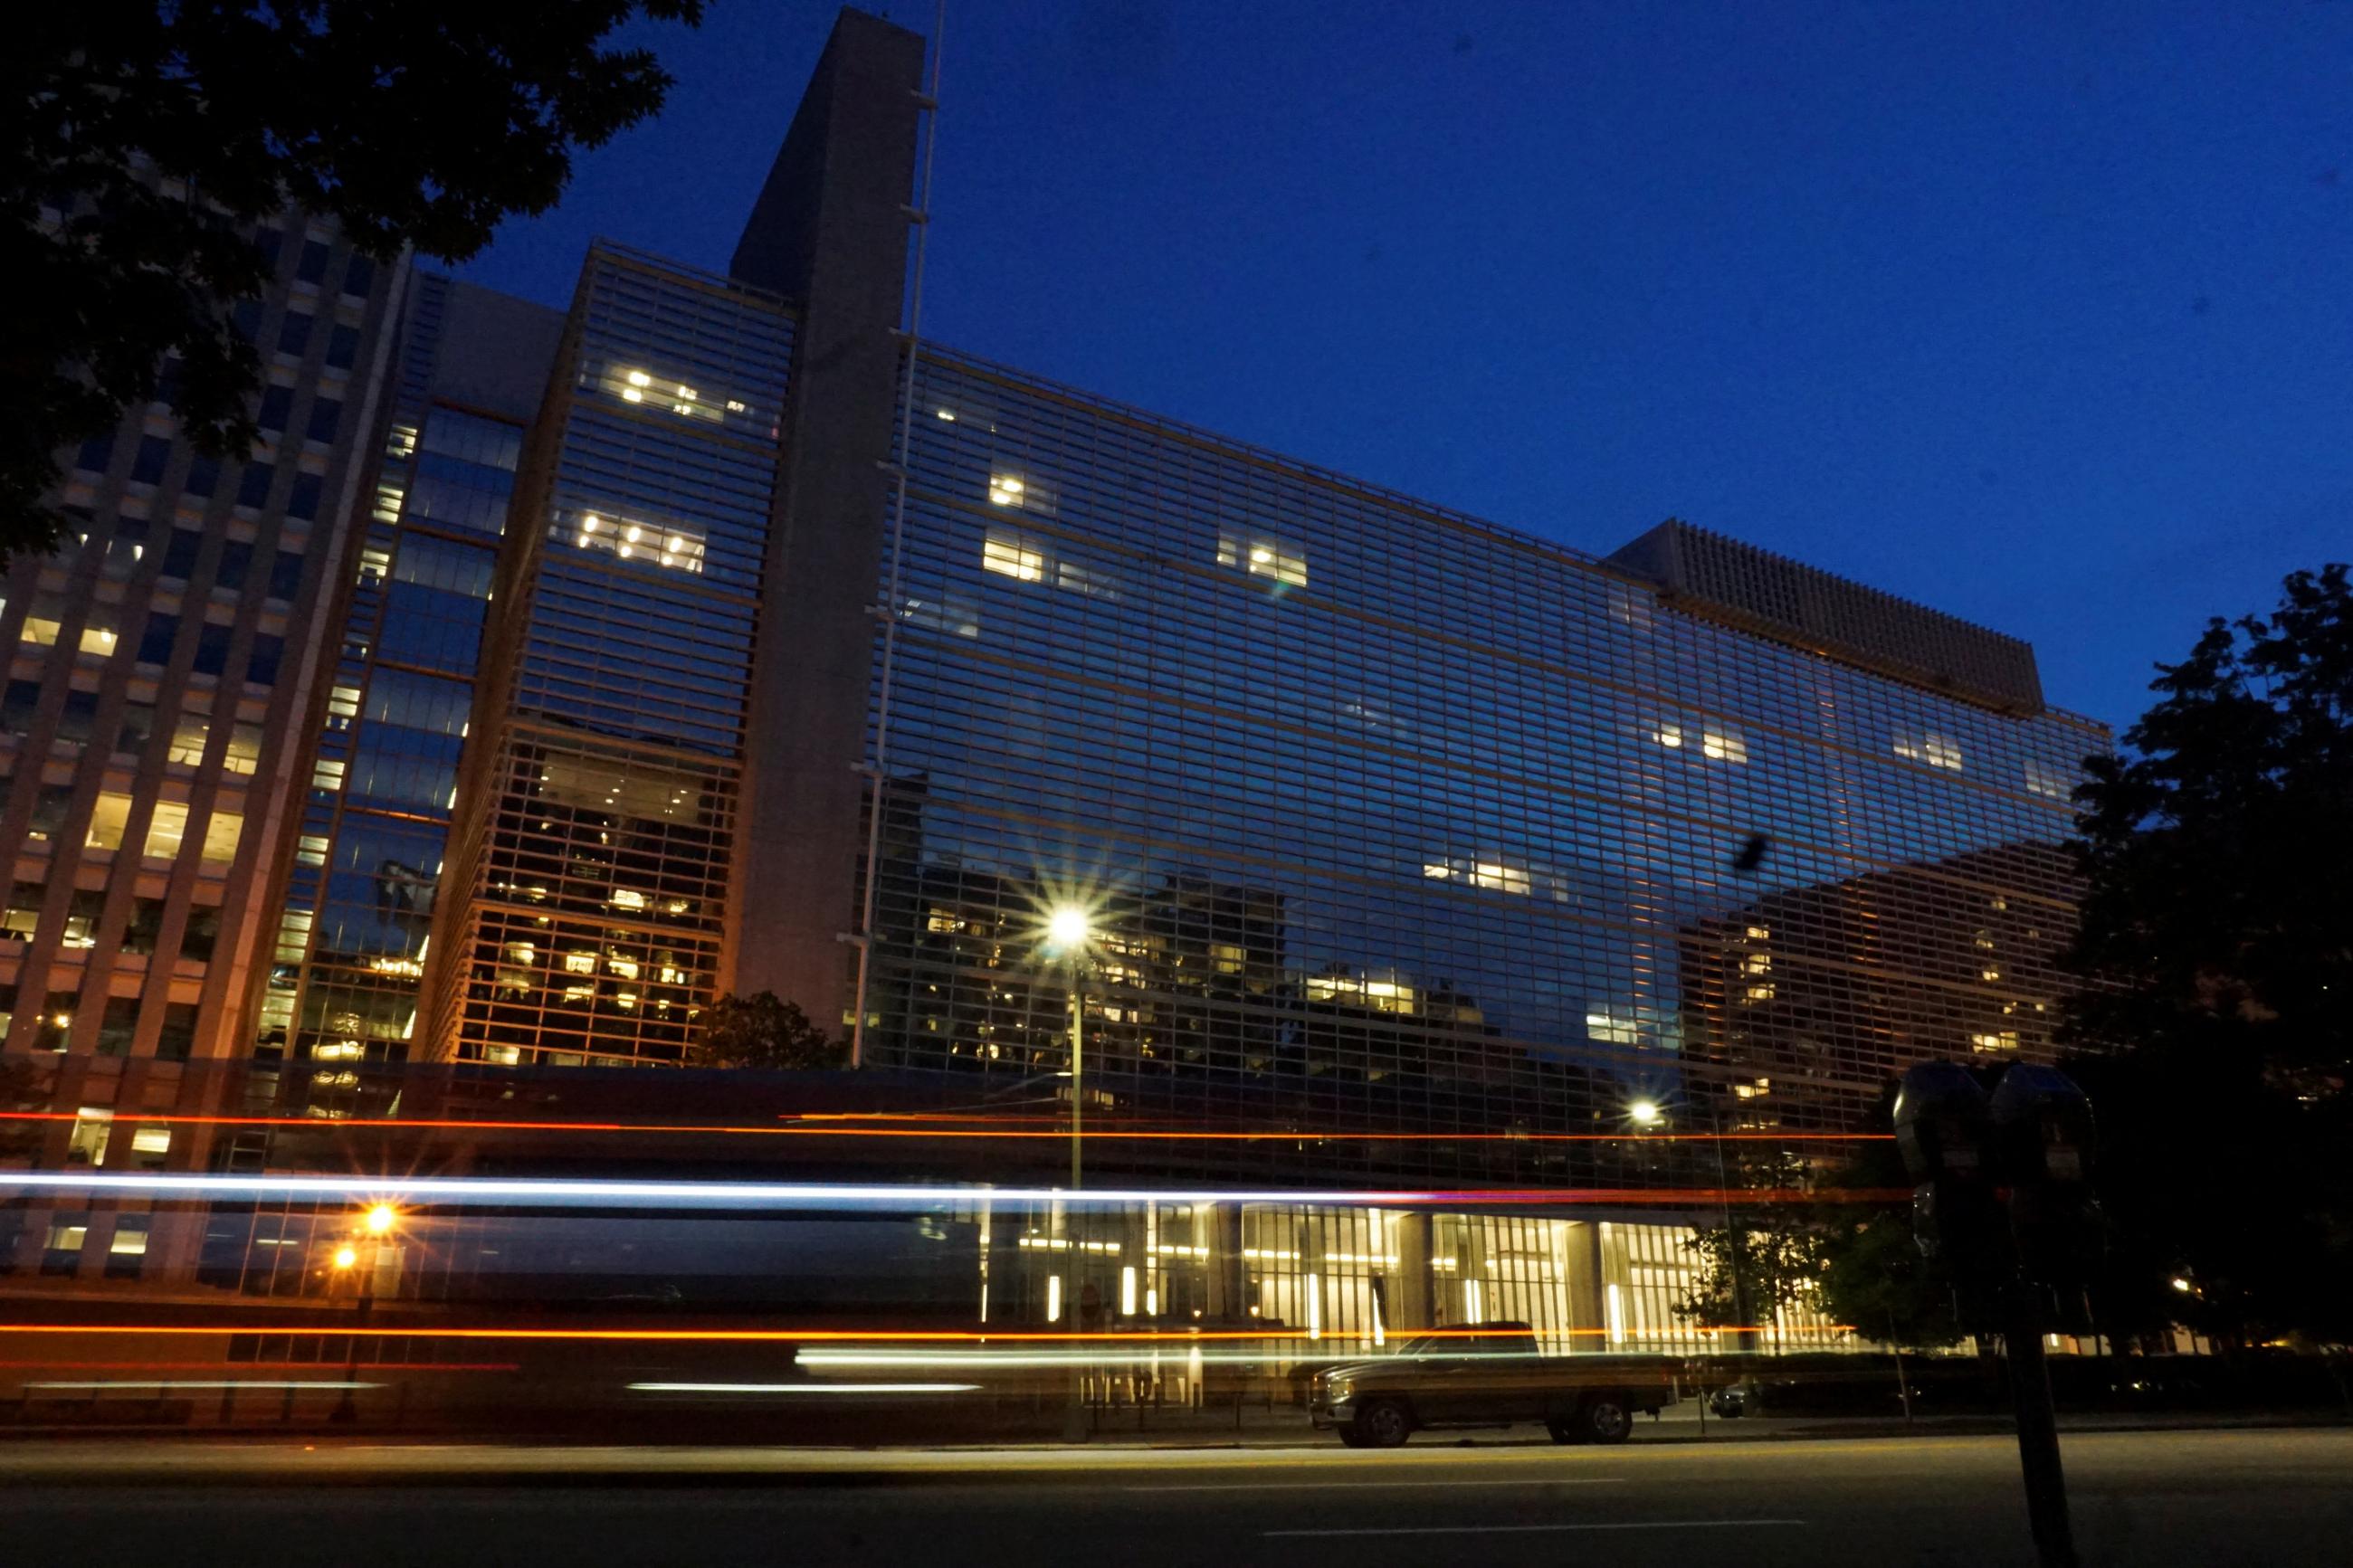 a long exposure image captures cars passing the world bank building (a mid-rise building) in Washington DC, at night